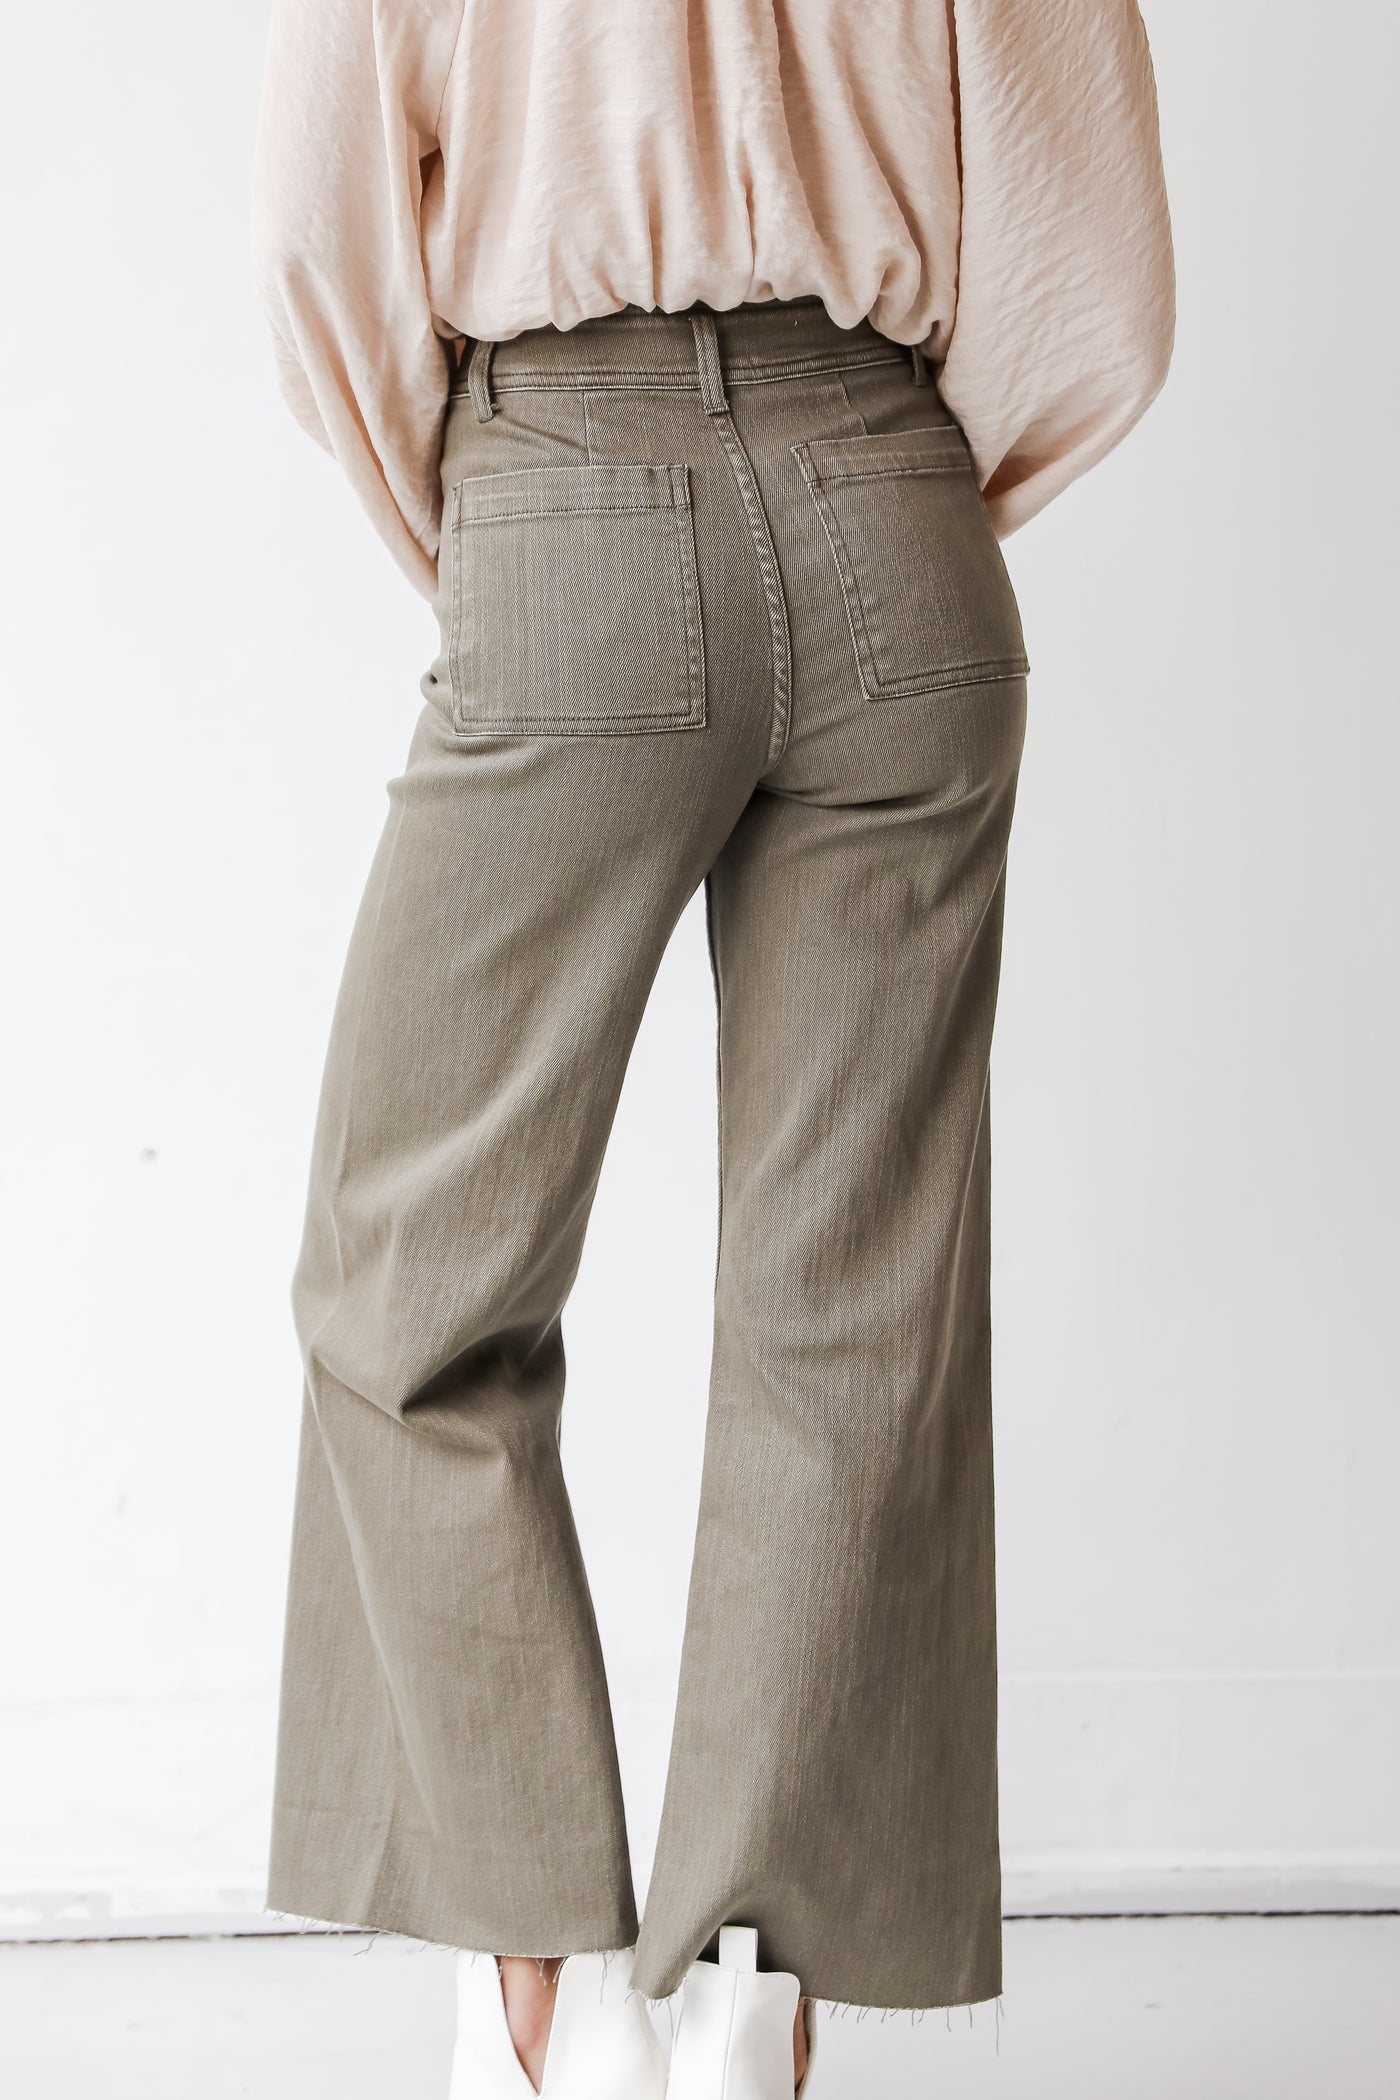 olive straight leg jeans back view